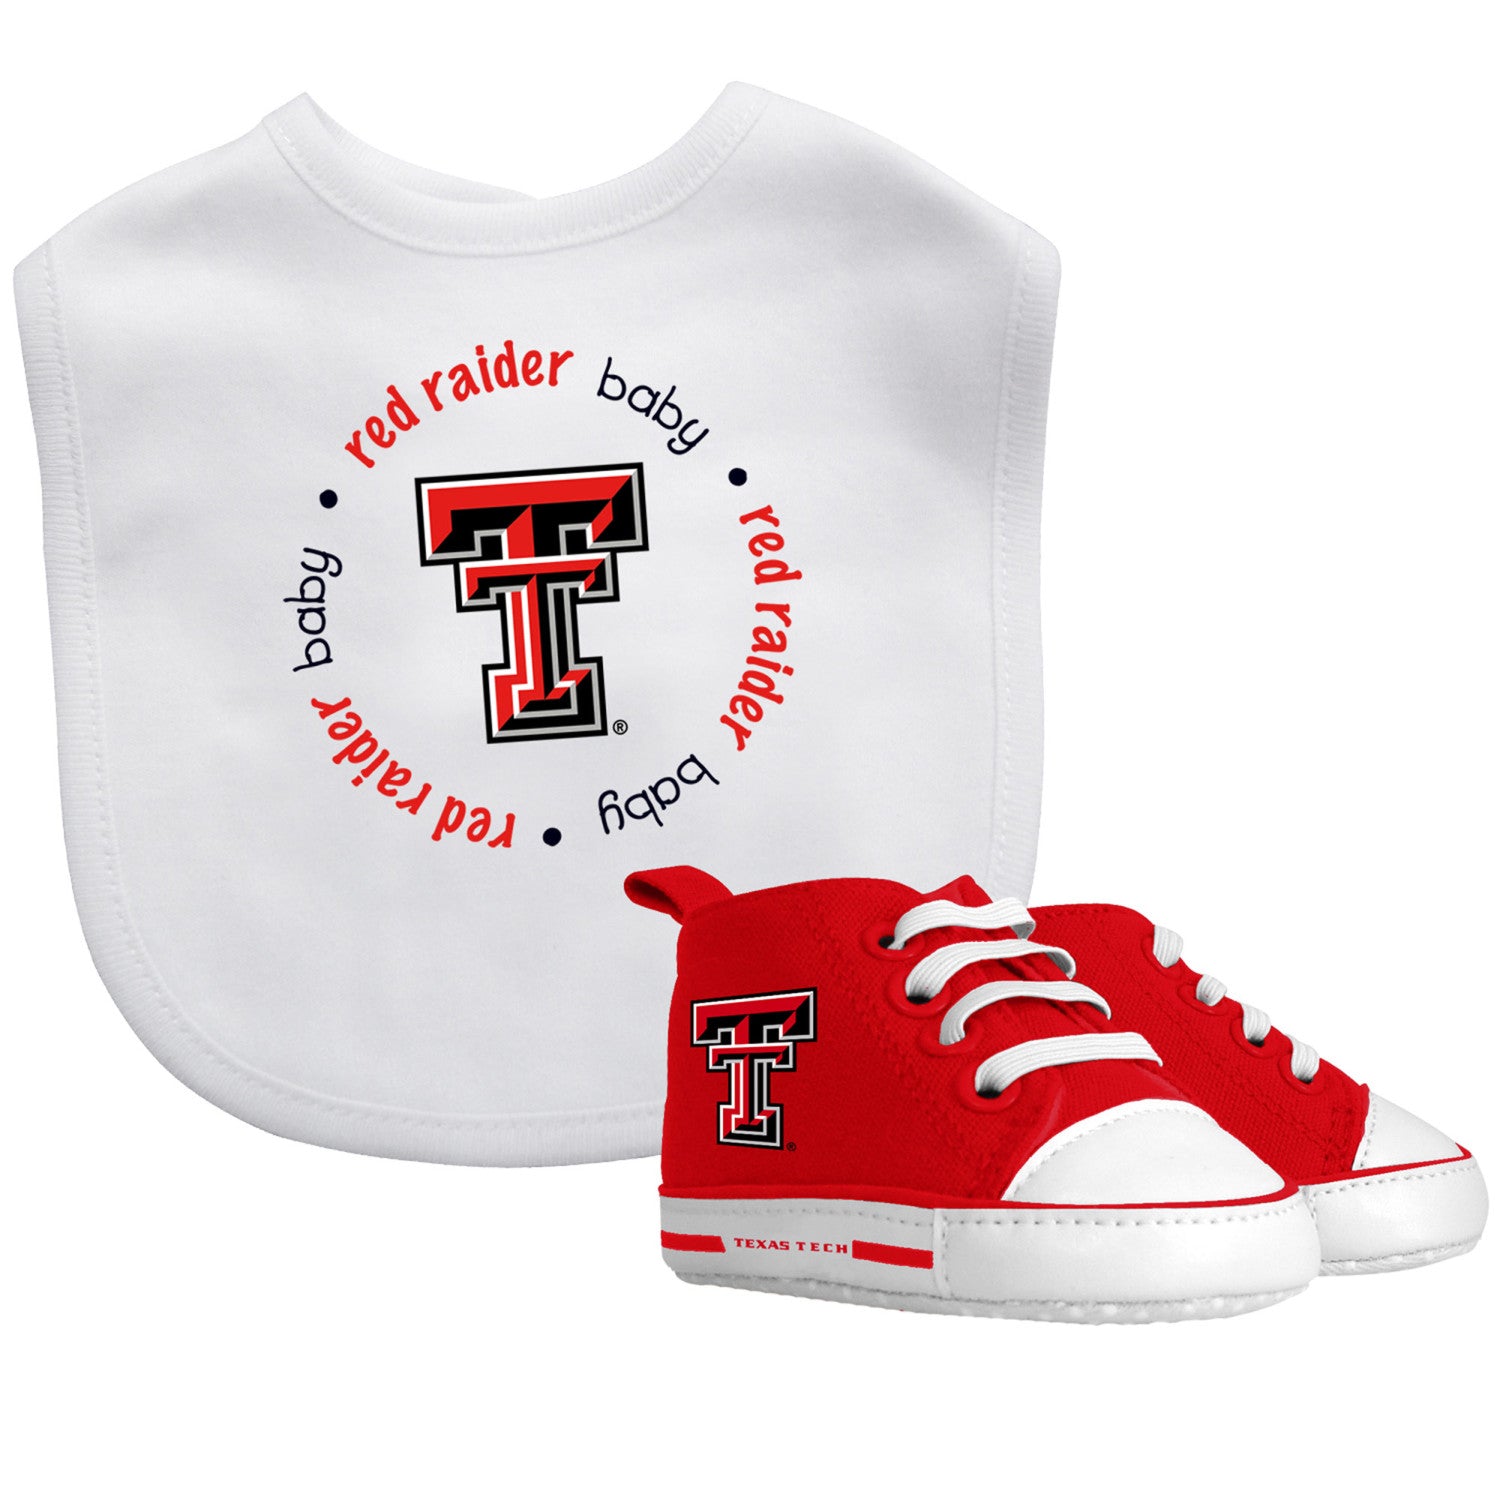 Texas Tech Red Raiders - 2-Piece Baby Gift Set